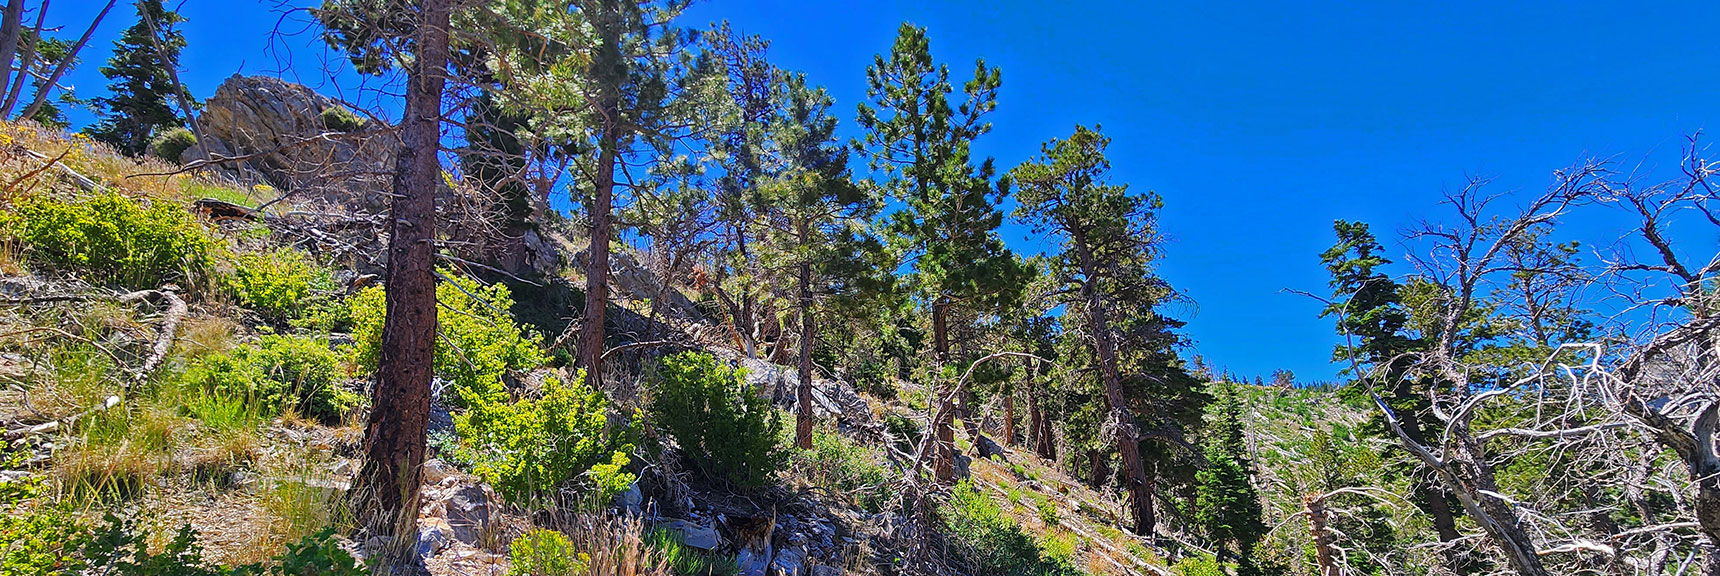 Now Ascending Middle of Western Approach Ridge. Incline Levels Out a Bit. | Fletcher Canyon to Harris Mountain Summit | Mt Charleston Wilderness, Nevada